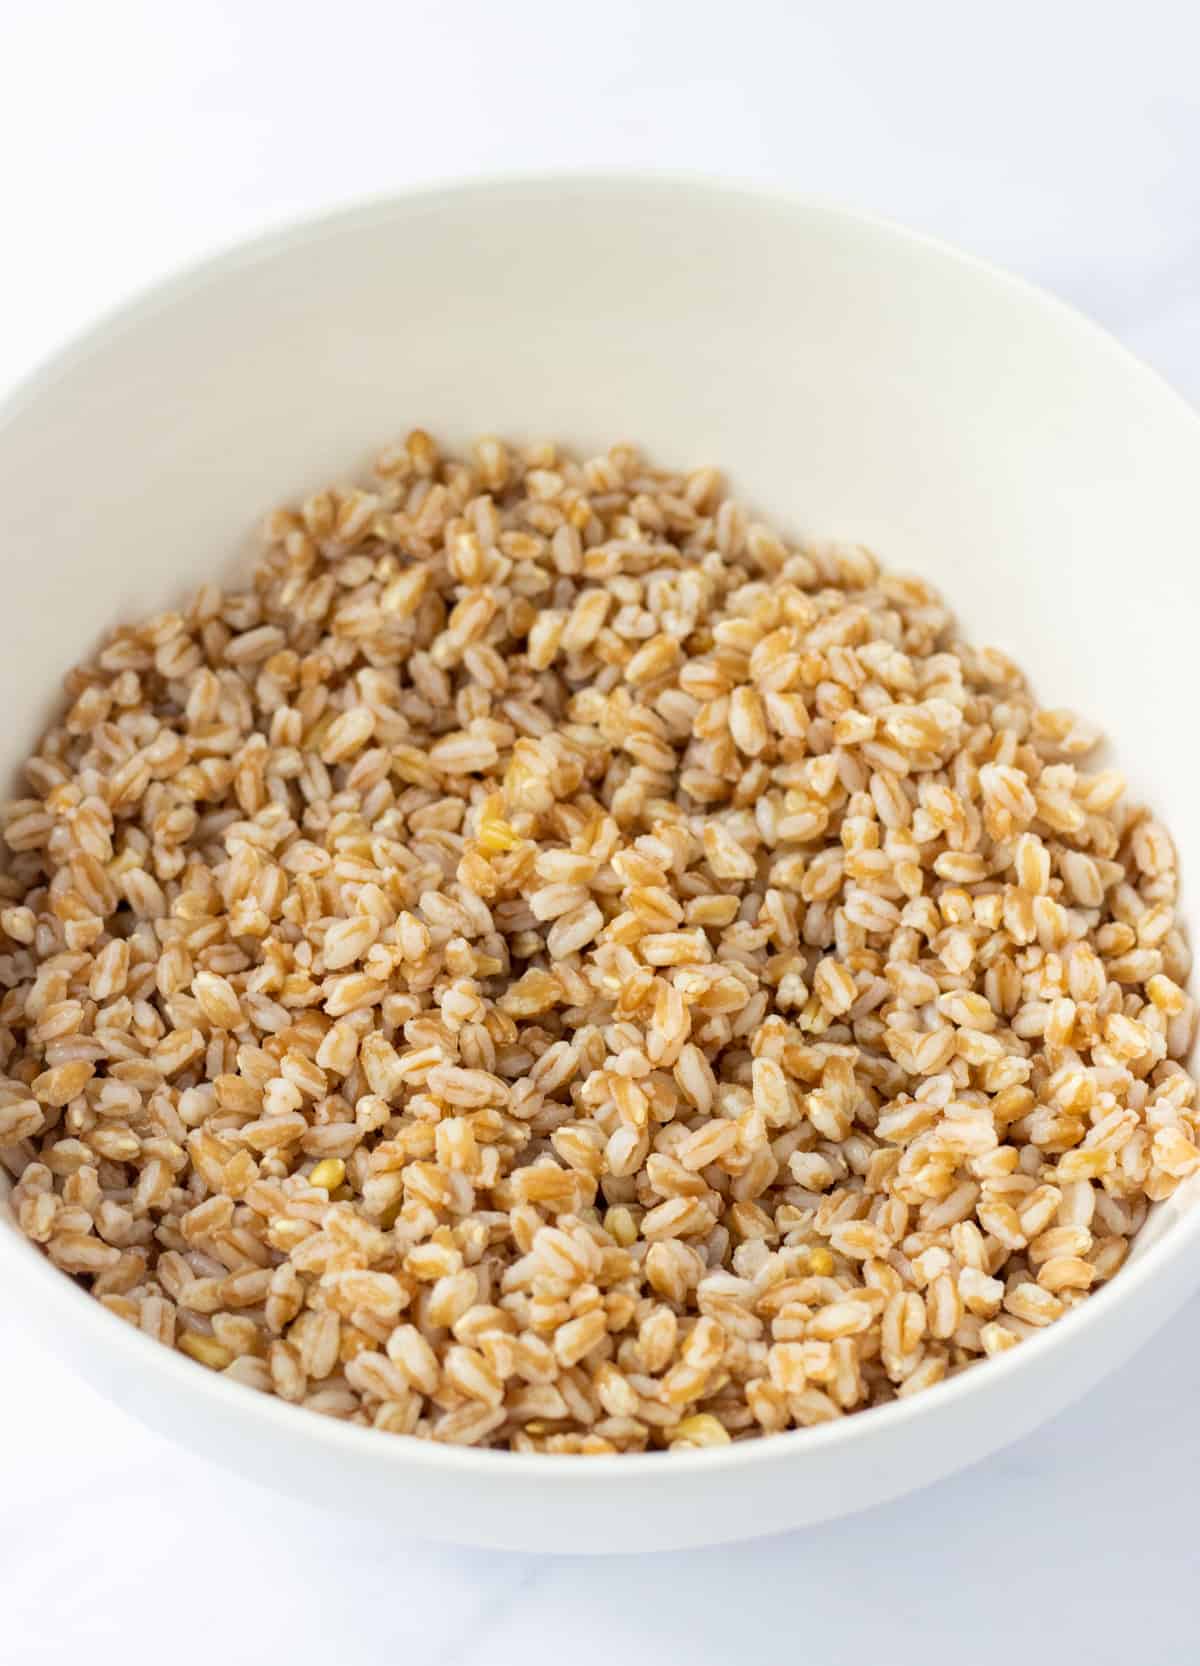 Cooked farro in a bowl.